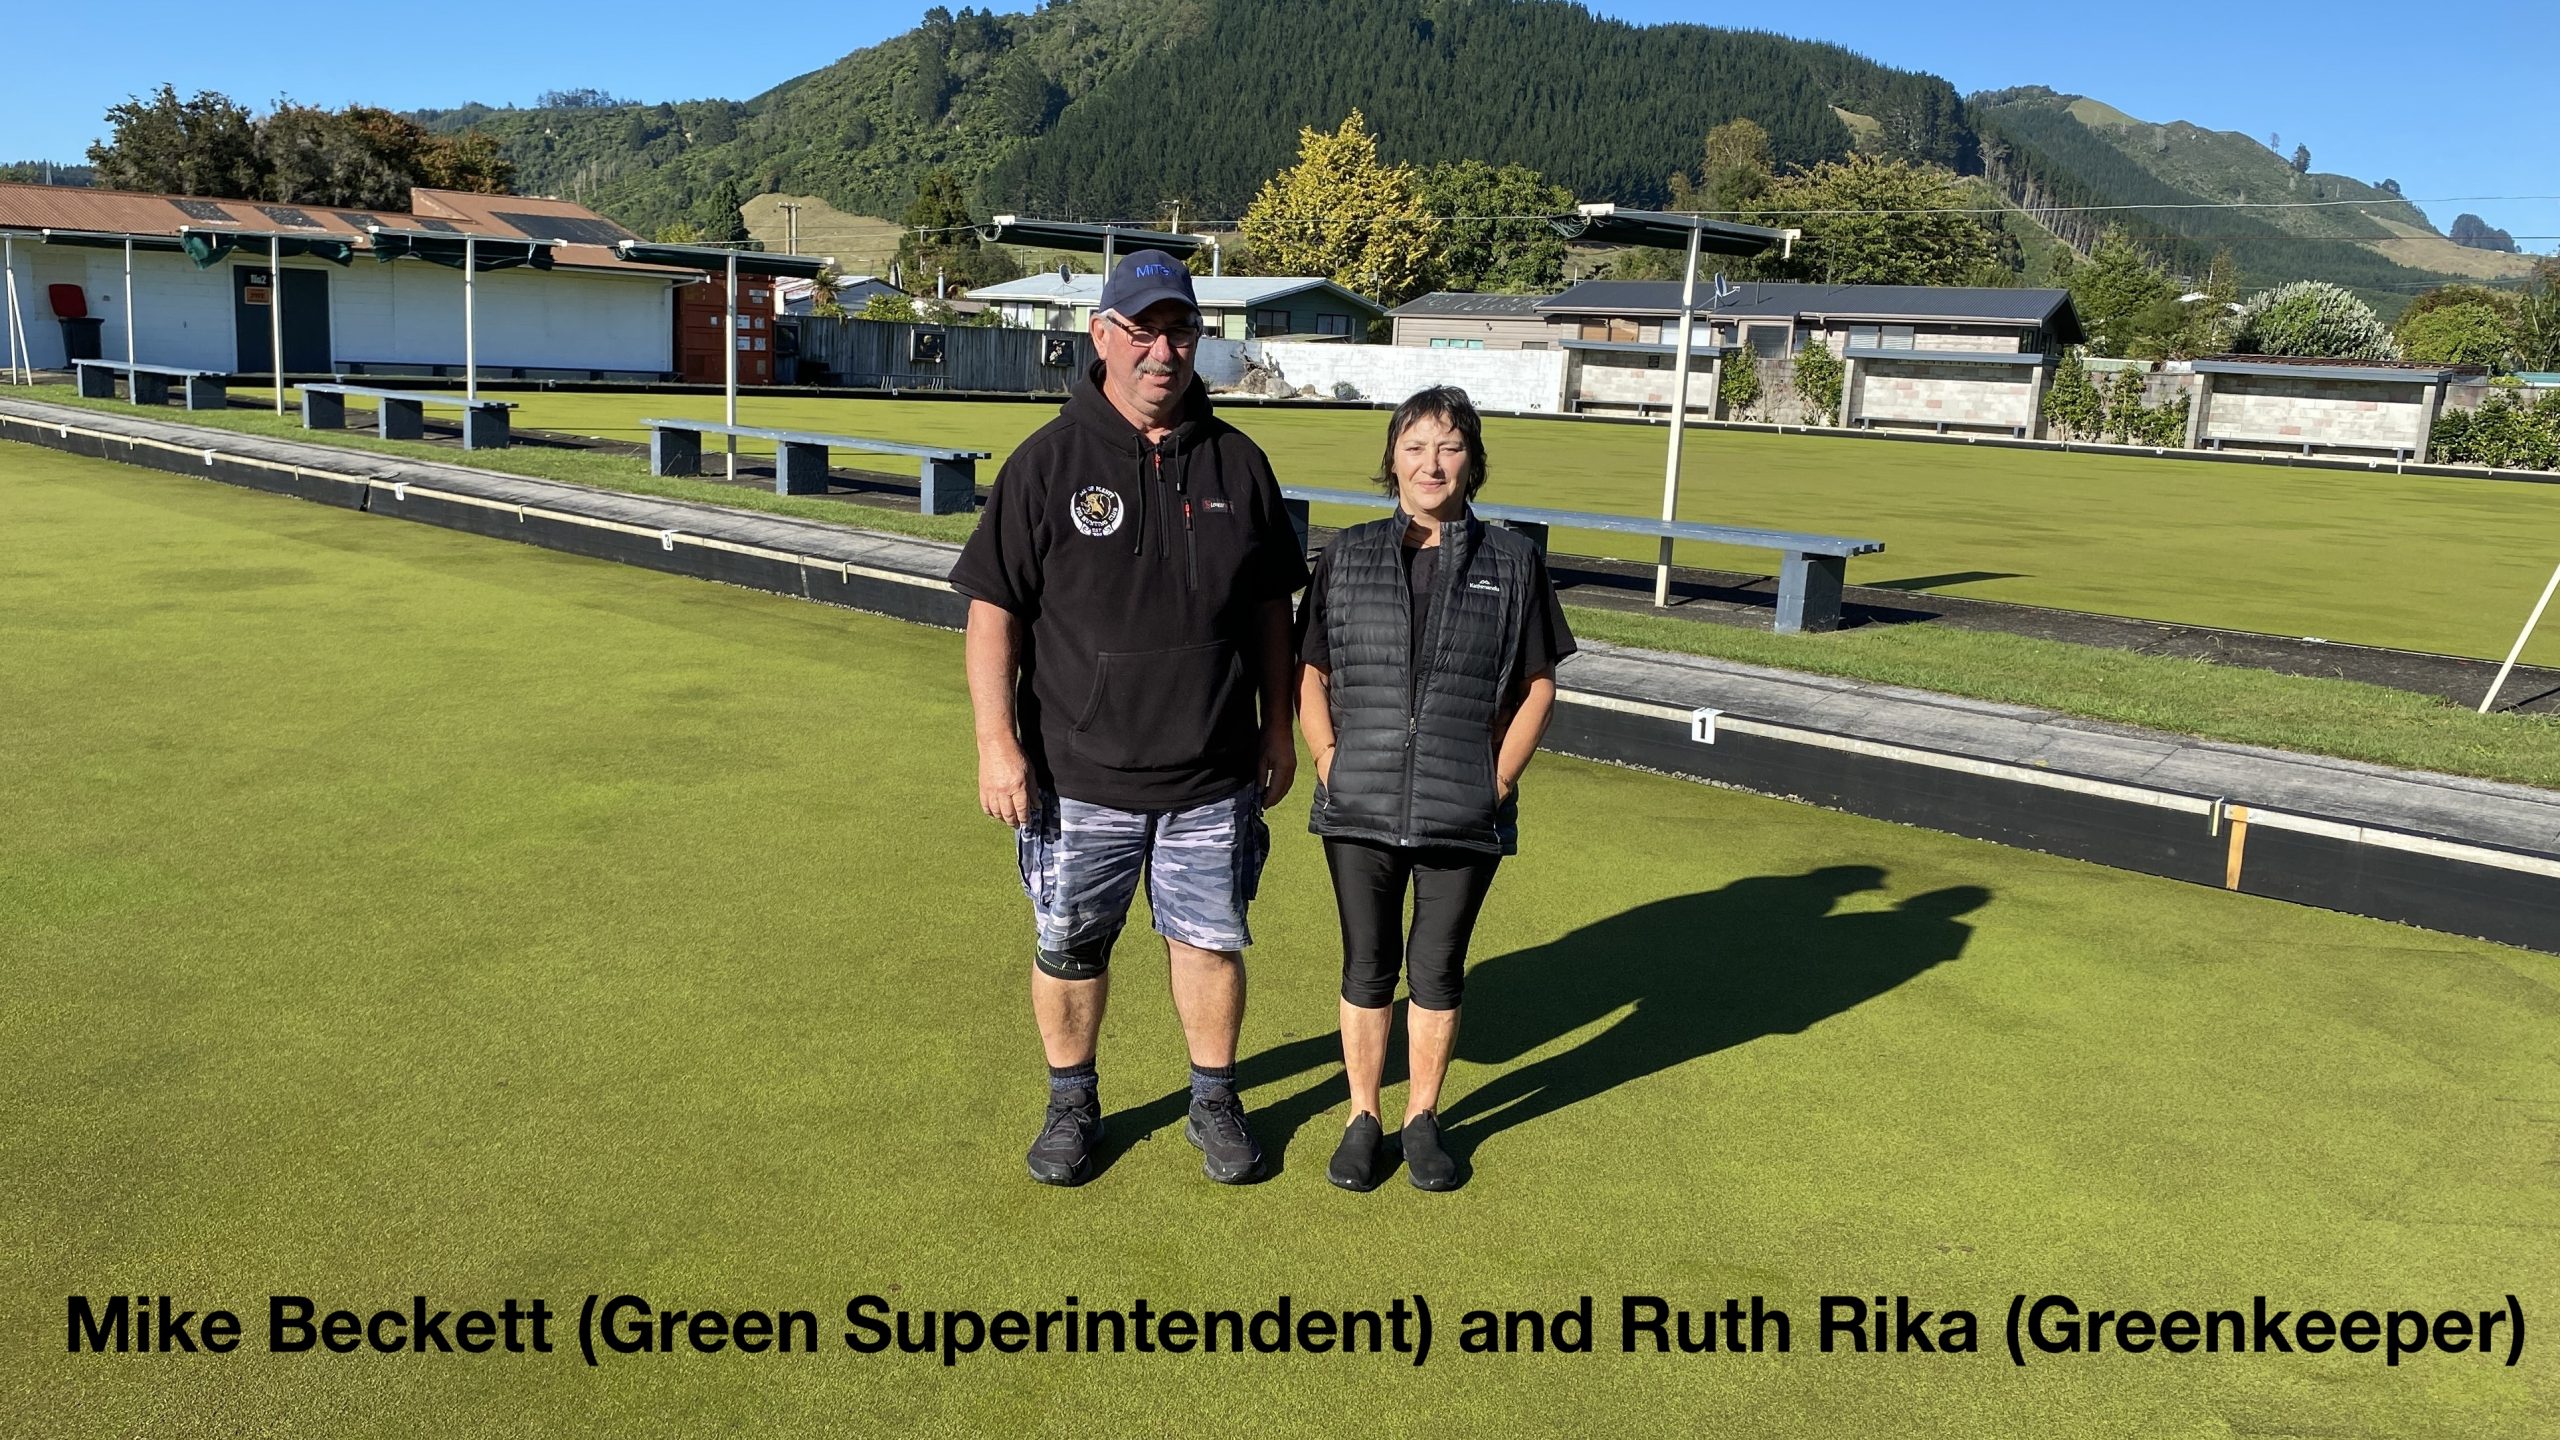 Featured Image for “Ruth Rika : New Zealand’s only woman greenkeeper?”